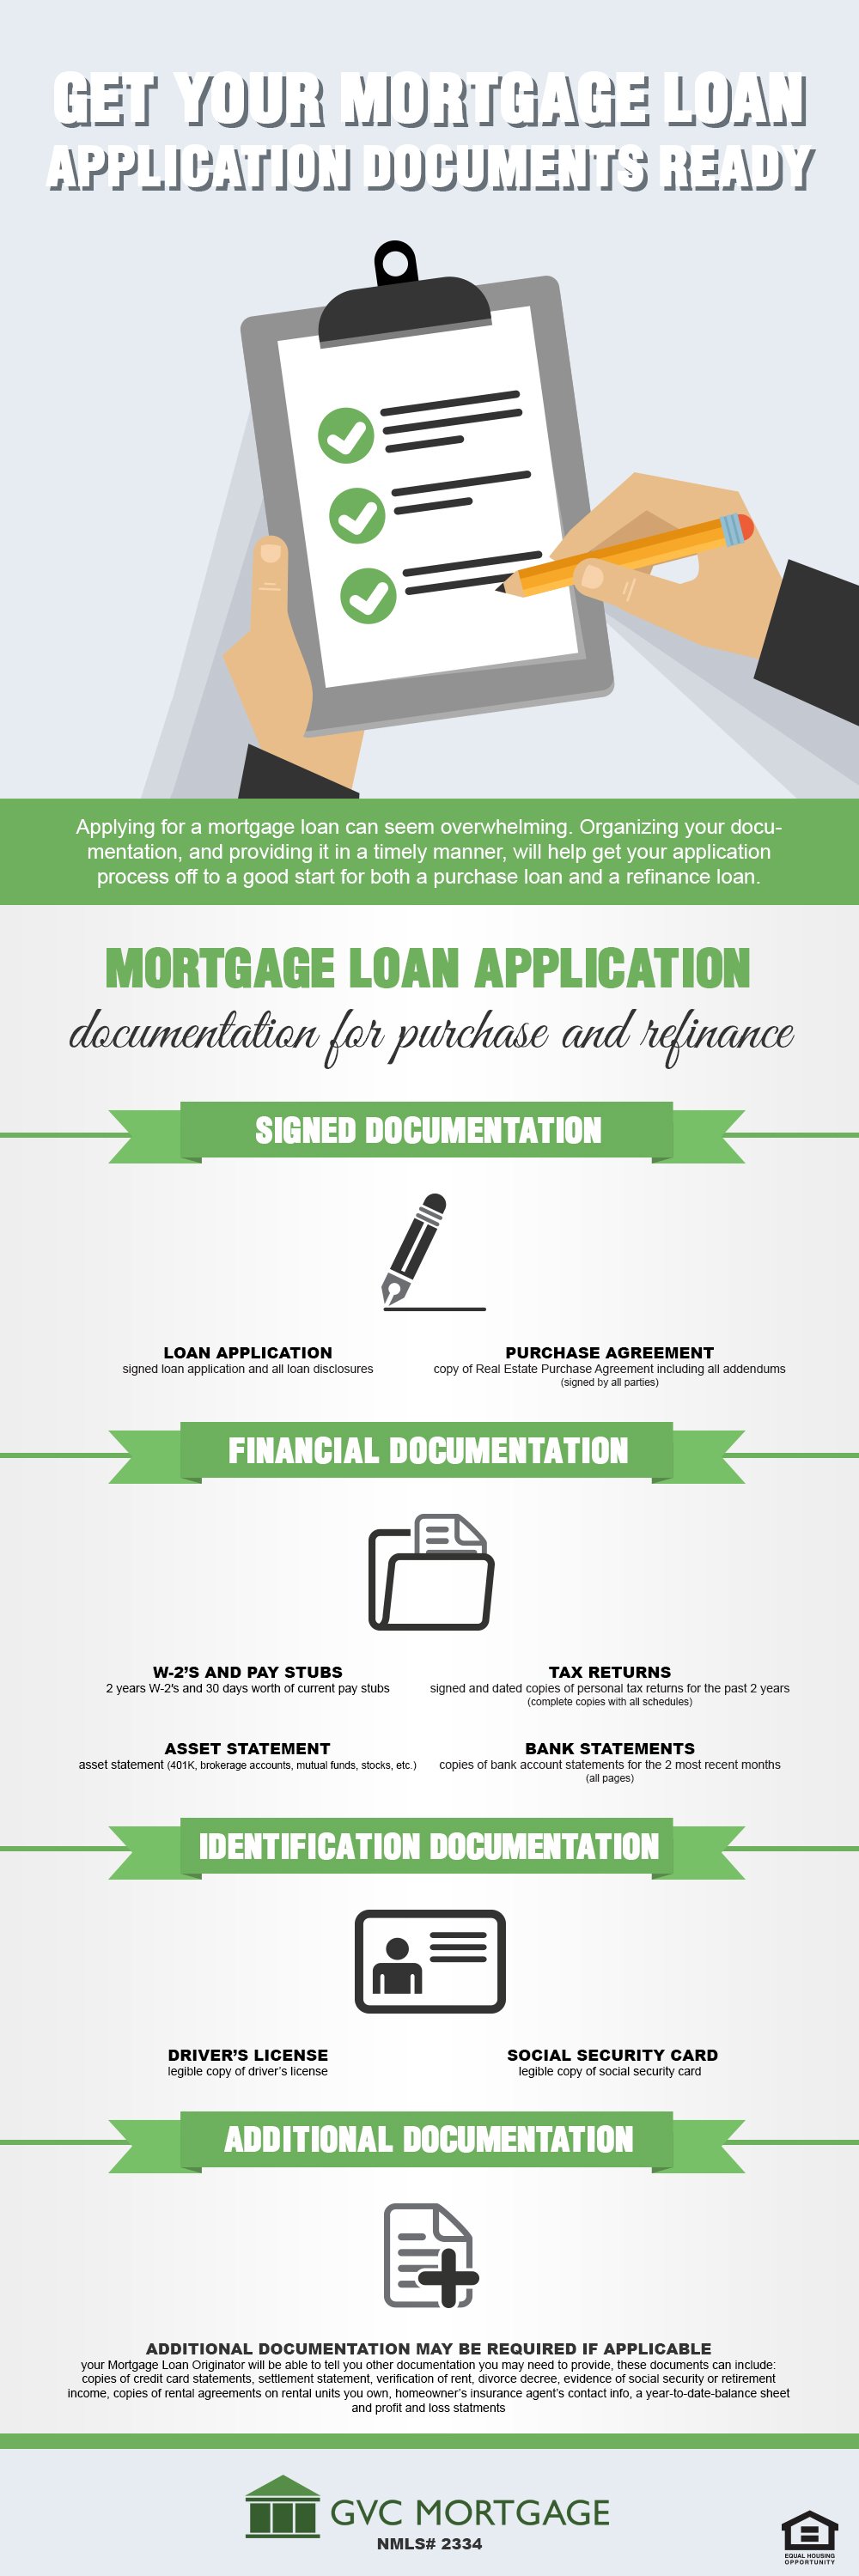 get-your-mortgage-loan-application-documents-ready